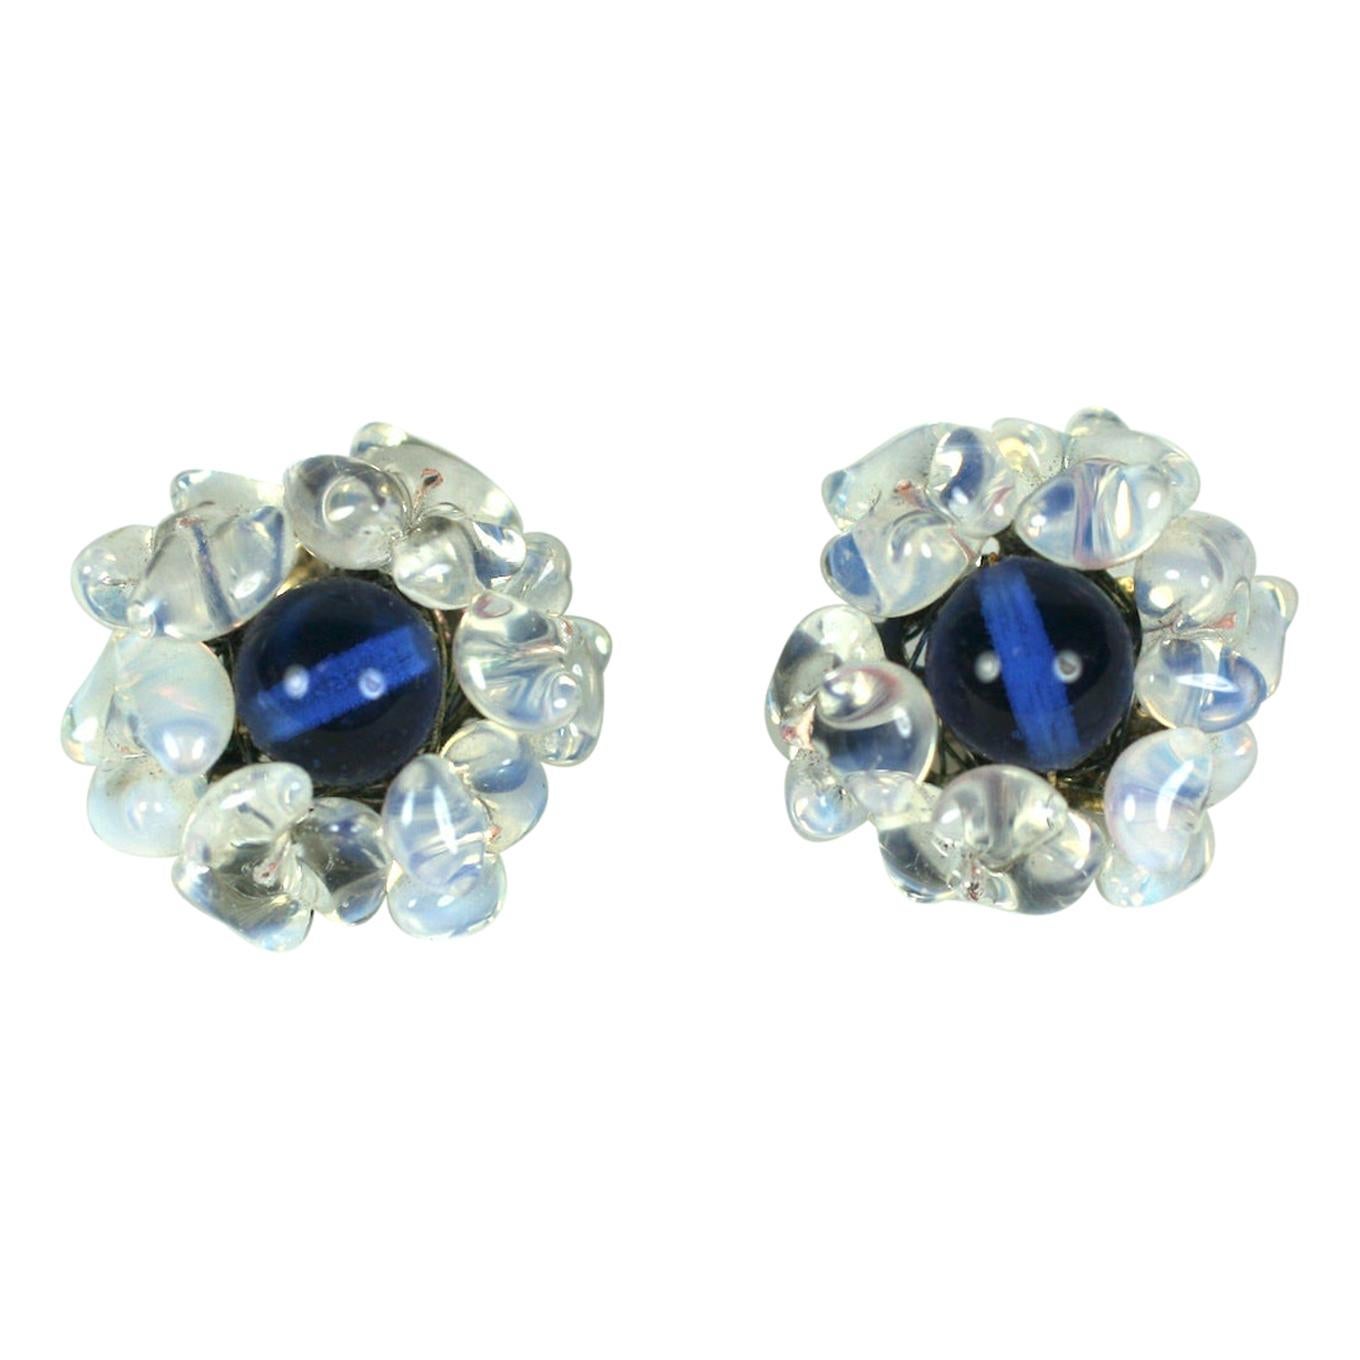 Louis Rousselet Sapphire and Opaline Earclips